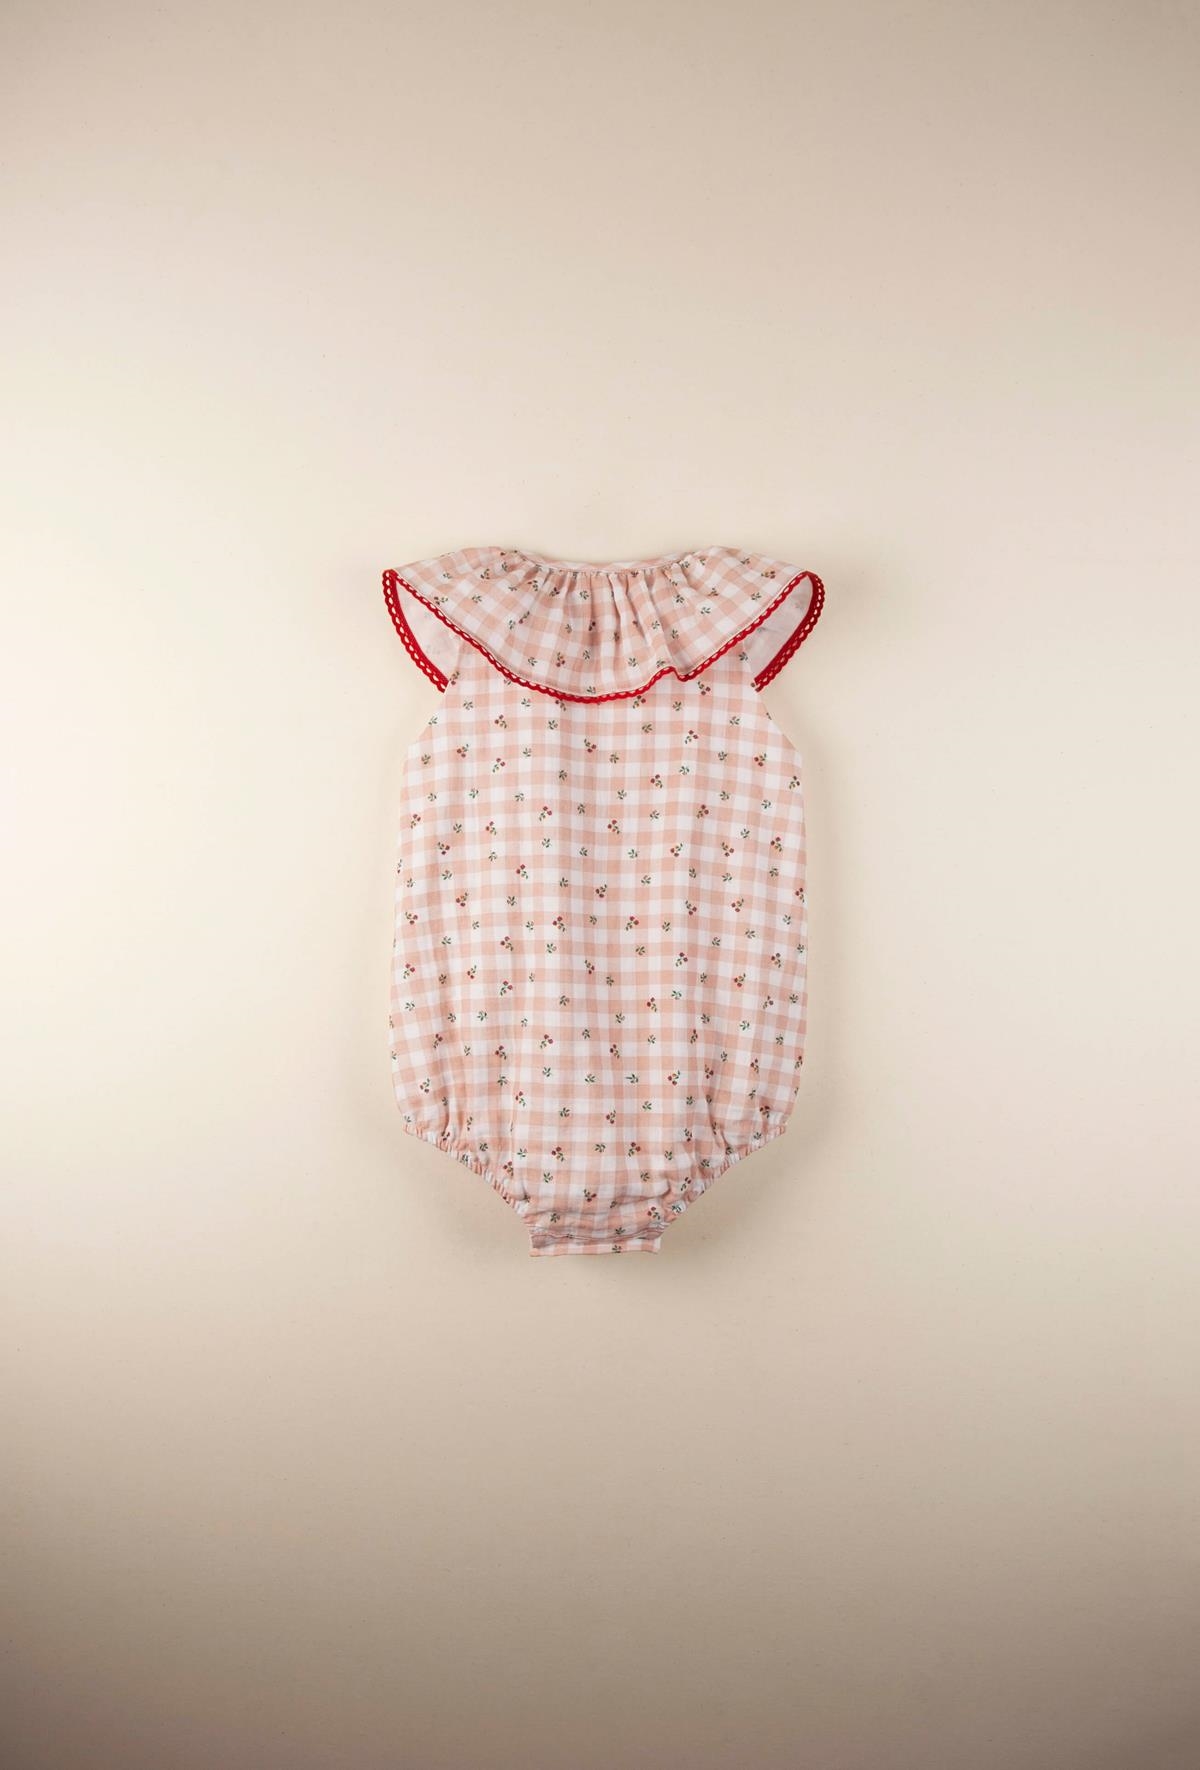 Mod.8.3 Gingham and floral organic romper suit with frilled collar | SS22 Mod.8.3 Gingham and floral organic romper suit with frilled collar | 1